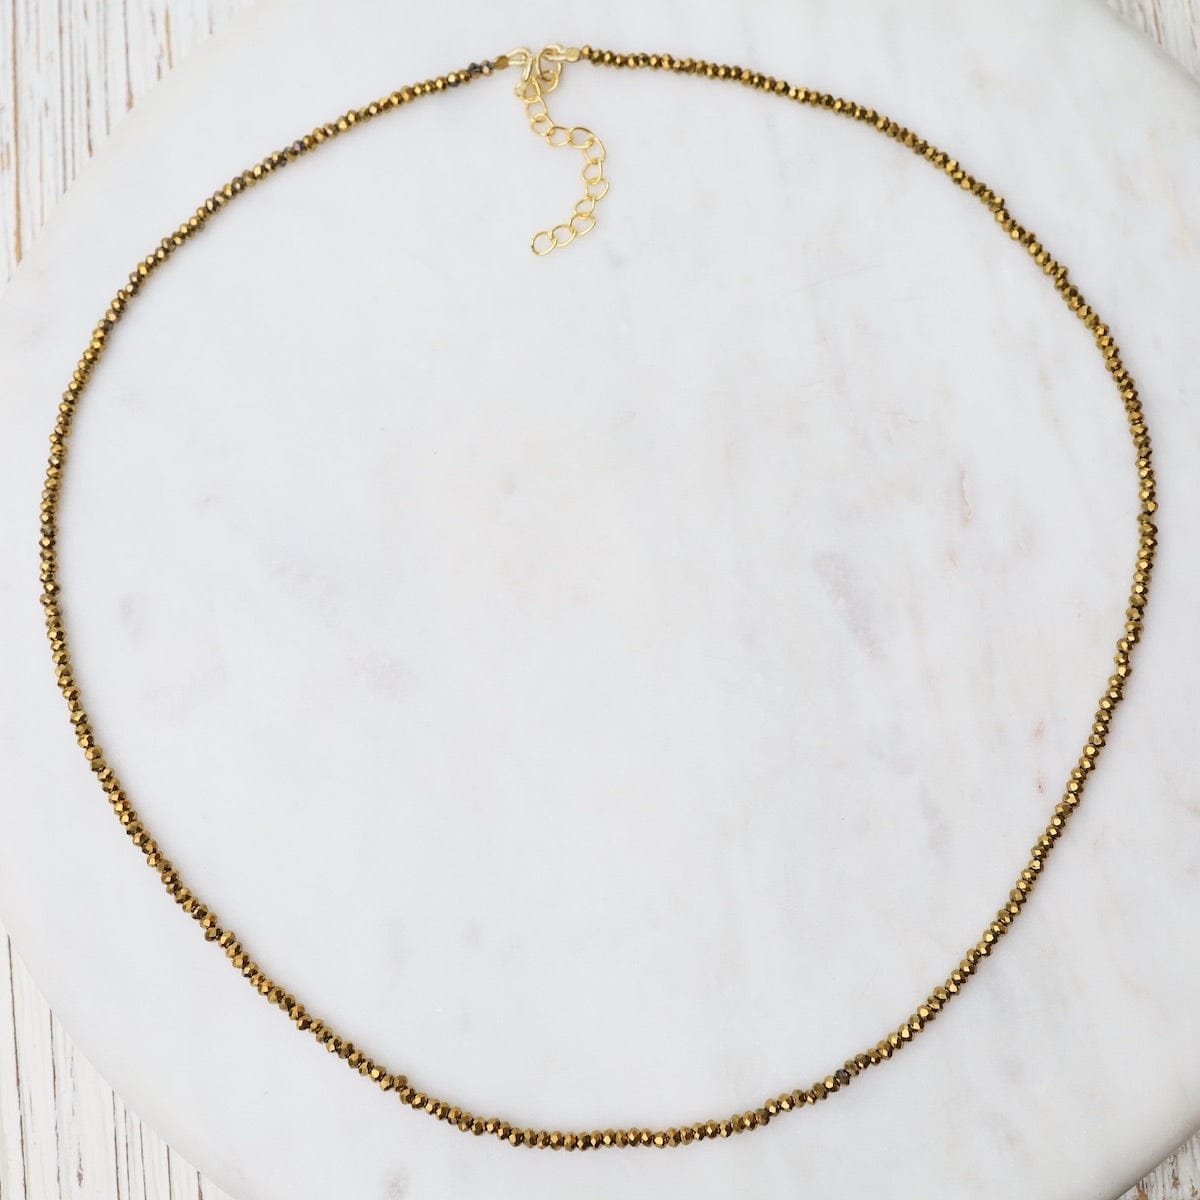 NKL Simple Stone Necklace - Gold Coated Pyrite